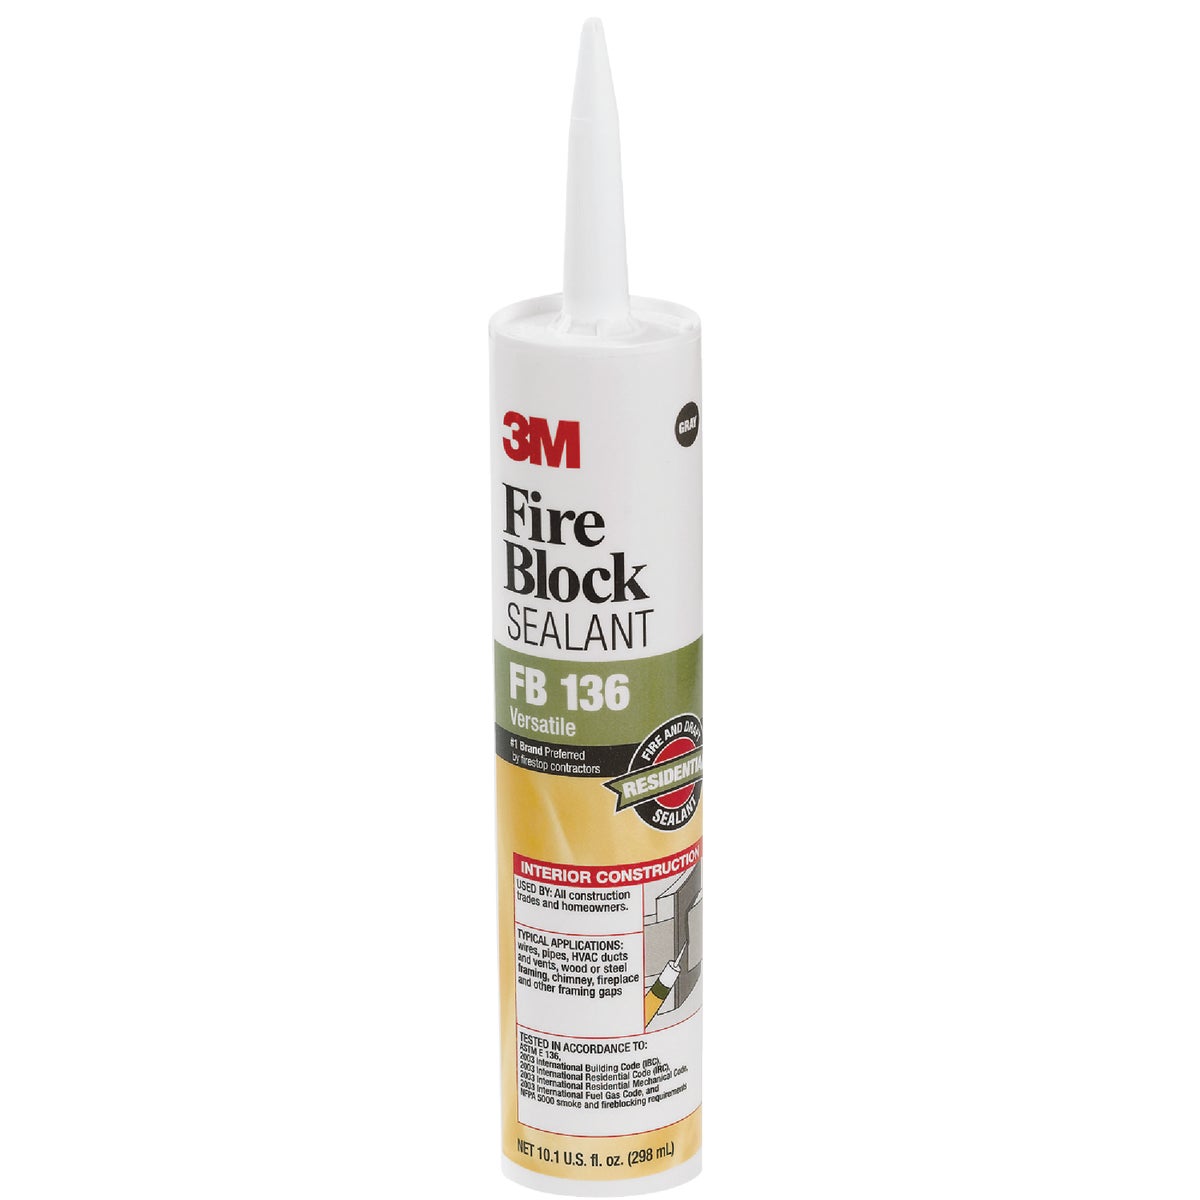 Item 781992, A 1-component, noncombustible draft, smoke, and fire blocking sealant, 